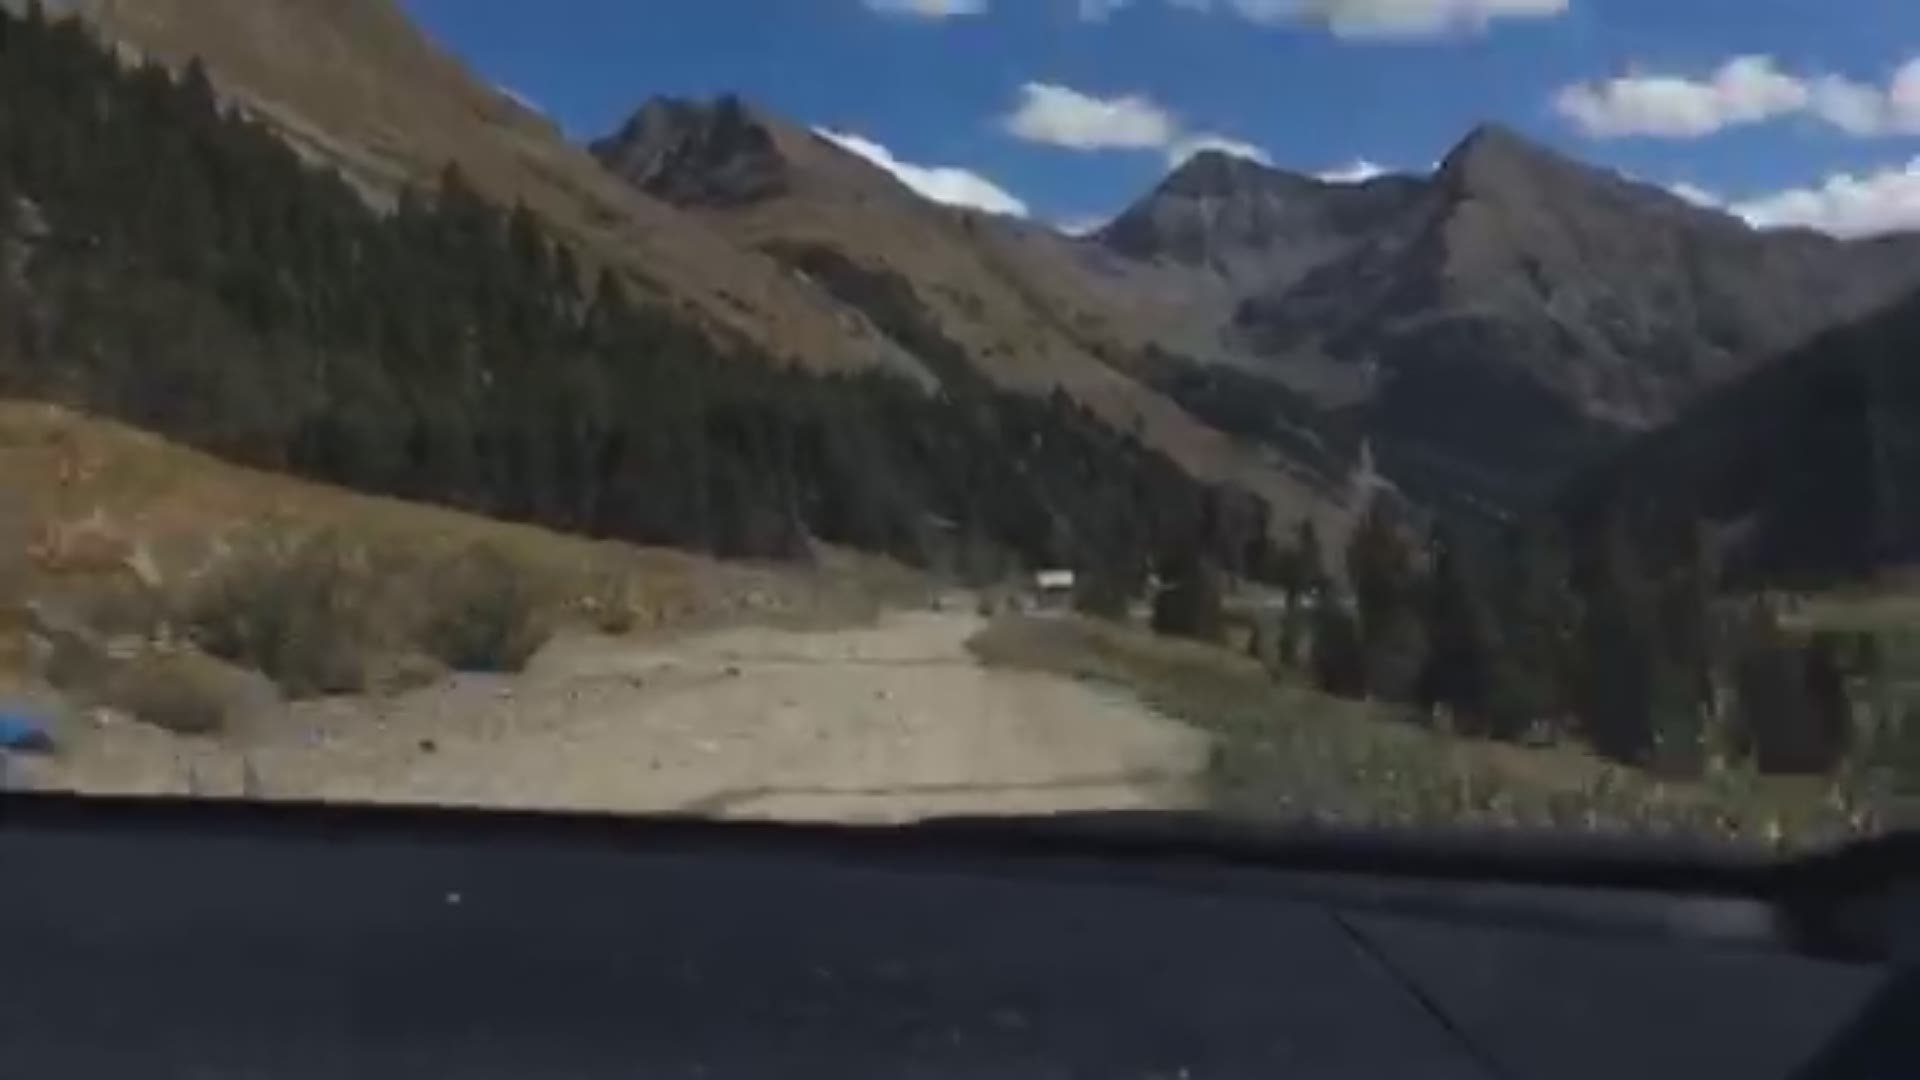 A hyperlapse video showing the drive up to Animas Forks from Ouray via US-550 and County Road 2.